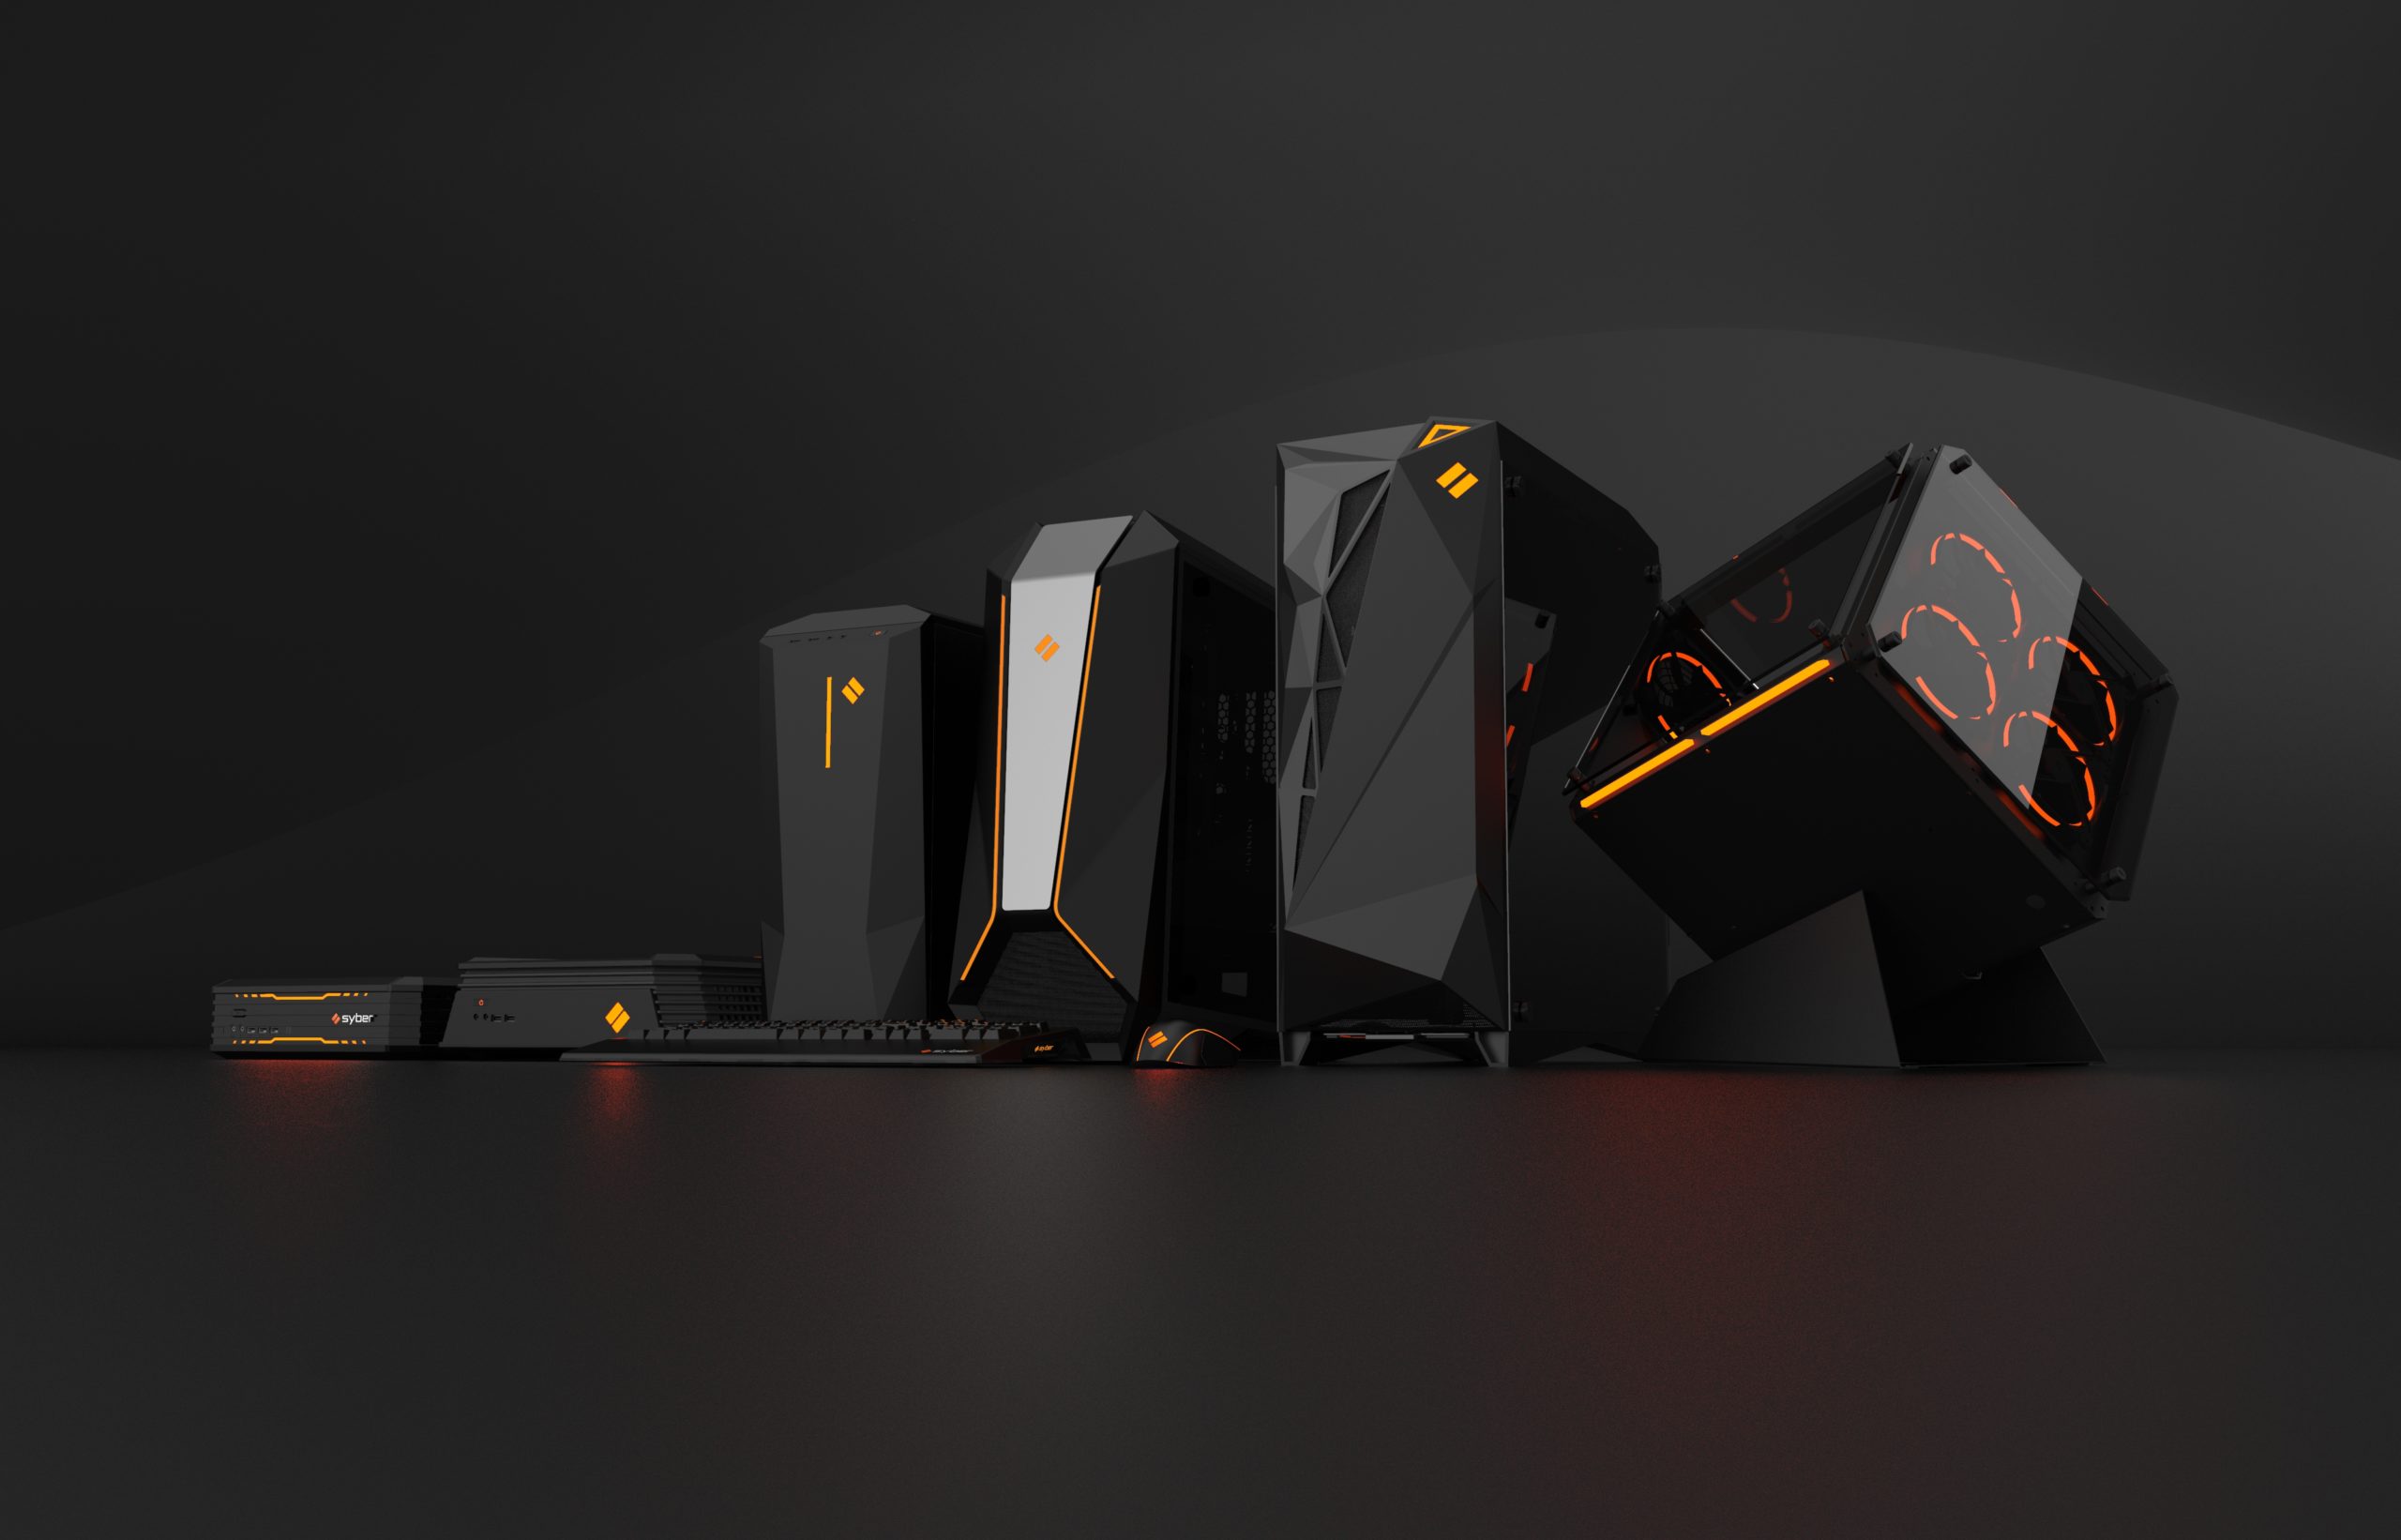 Rendering of Syber product family lineup